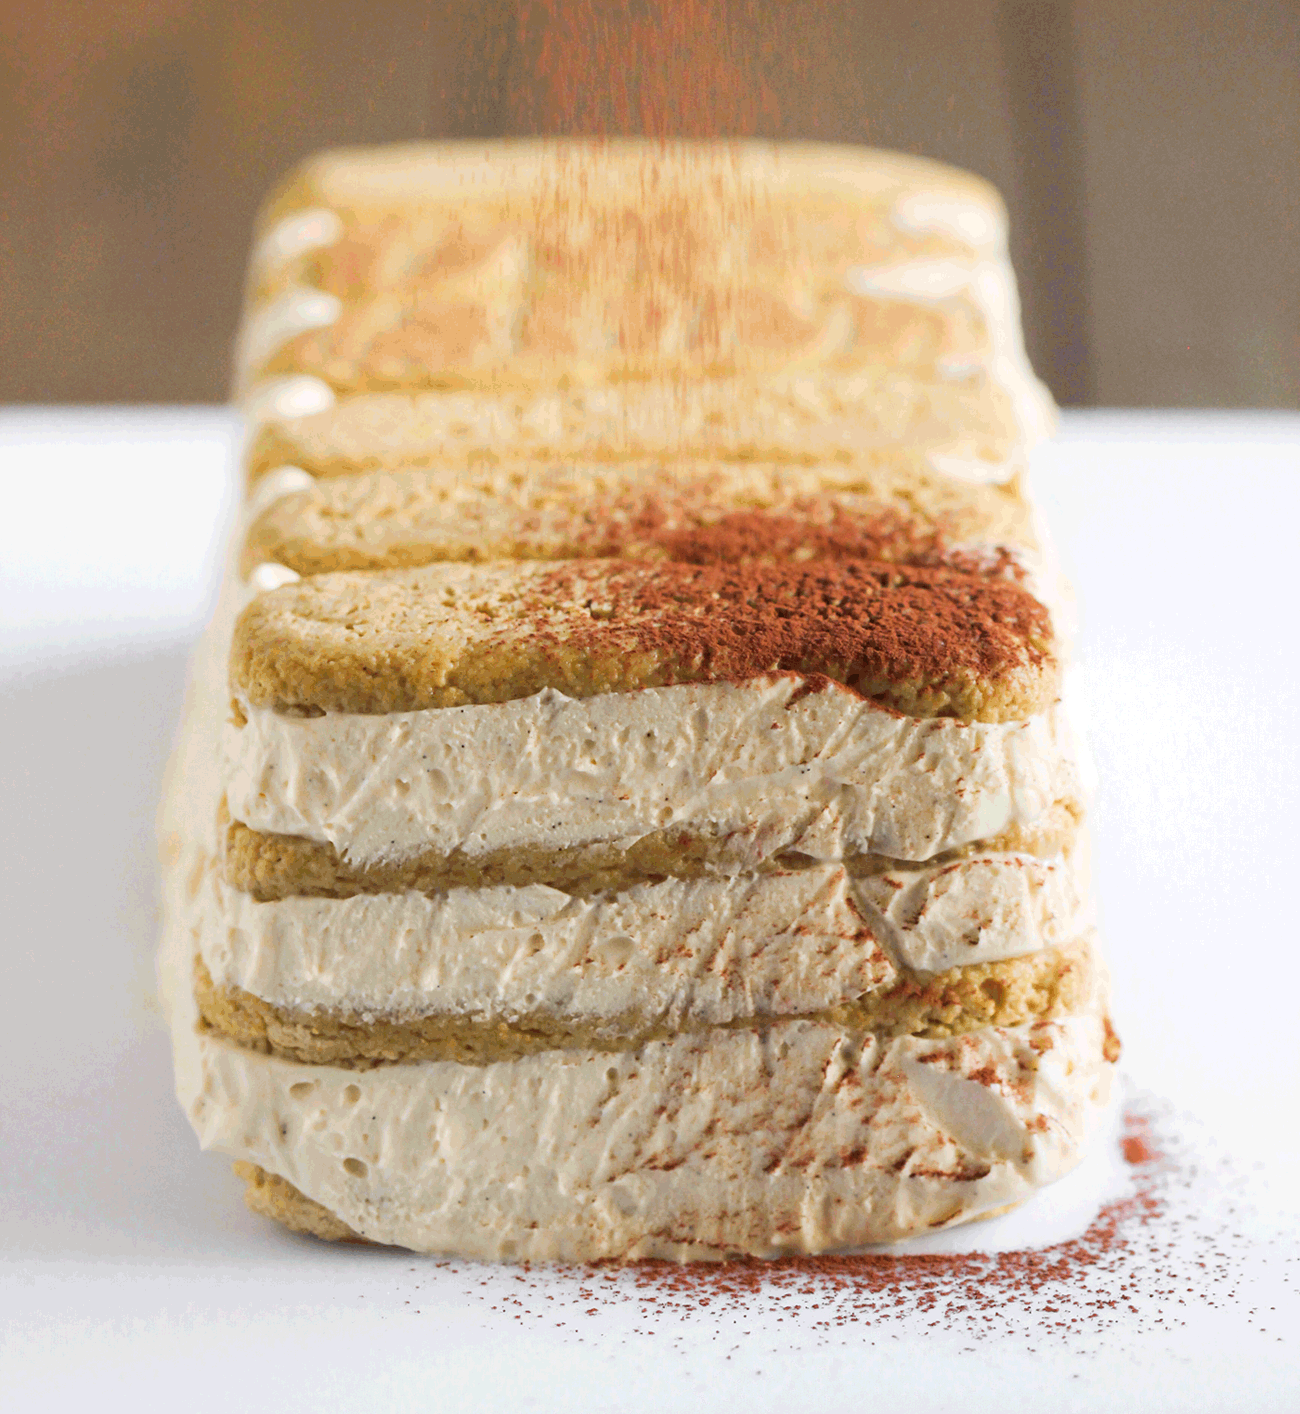 This Healthy Tiramisù is made completely from scratch, from the pastry cream to the ladyfingers! The creamy filling is rich and flavorful, the ladyfingers added texture and quality, and the cocoa provides balance and warmth to finish it all off. You’d never know this Tiramisù is sugar free and gluten free! Healthy Dessert Recipes at the Desserts With Benefits Blog (www.DessertsWithBenefits.com)